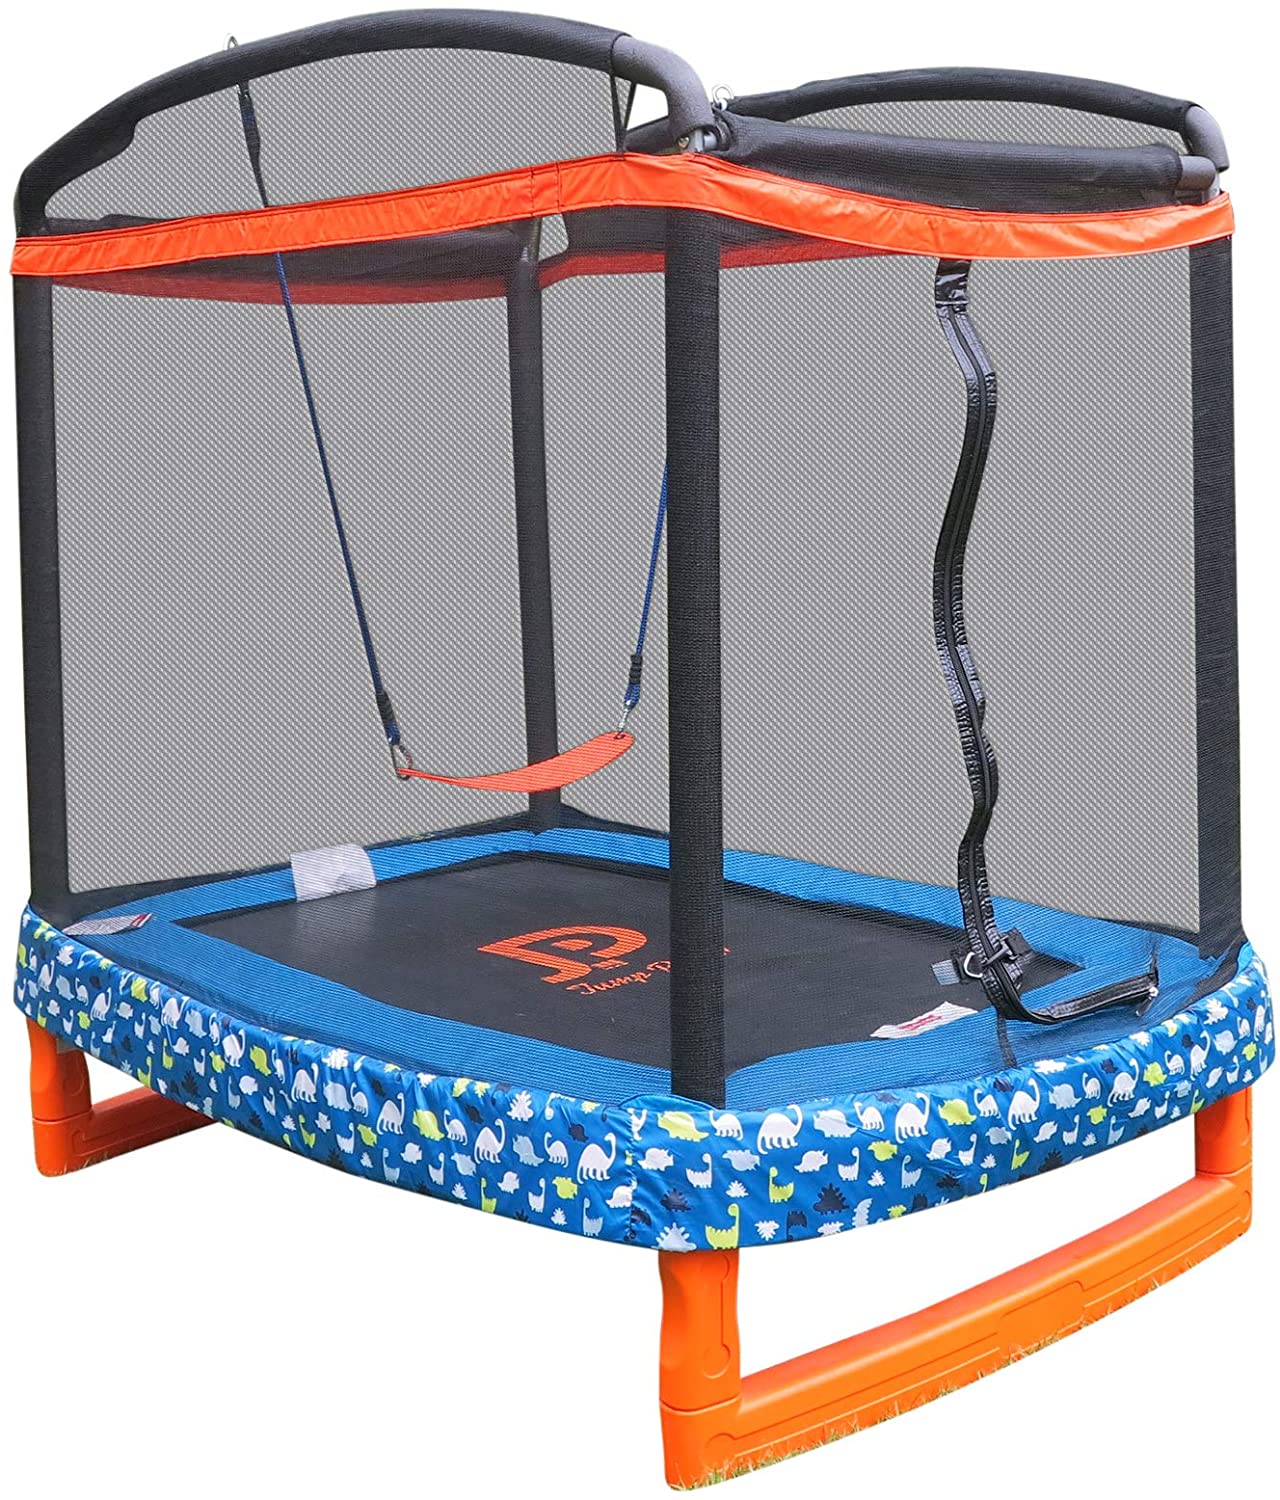 JUMP POWER 72 Inch x 50 Inch Rectangle Indoor and Outdoor Trampoline & Safety Net with Swing Combo for Toddlers & Kids